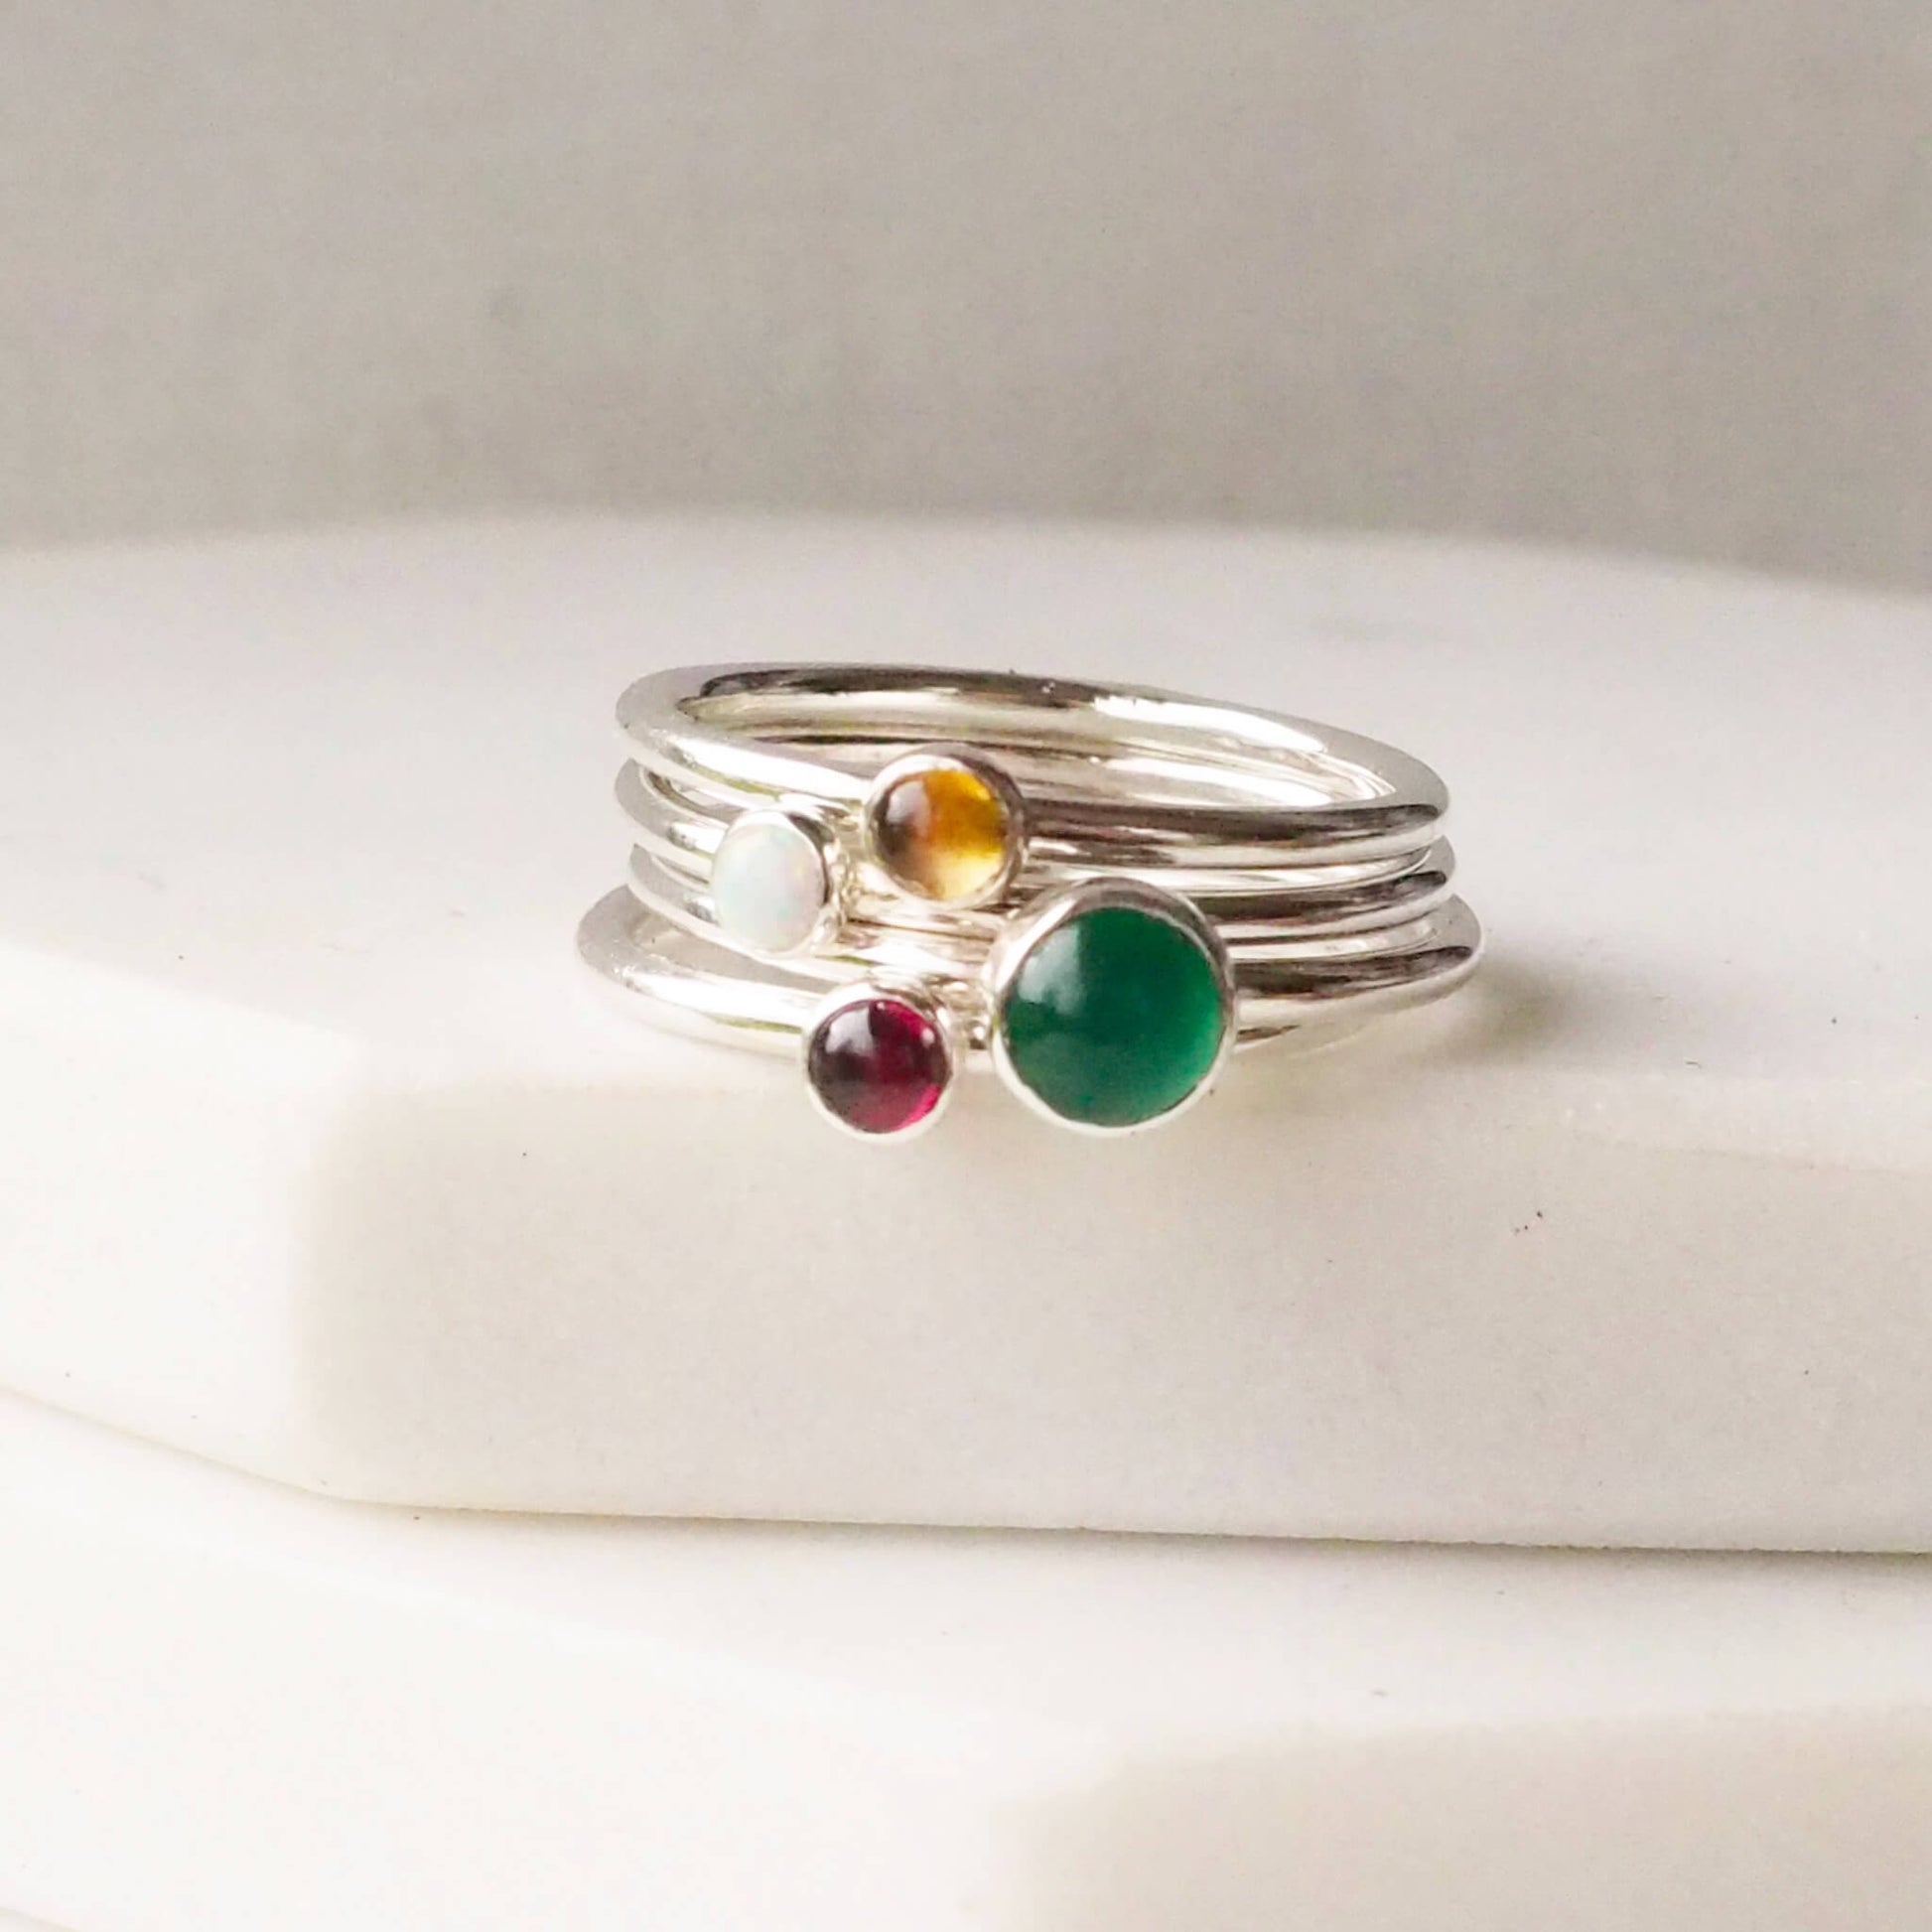 Four rings with the birthstones for May, January, November and October as as a four ring set made by maram jewellery